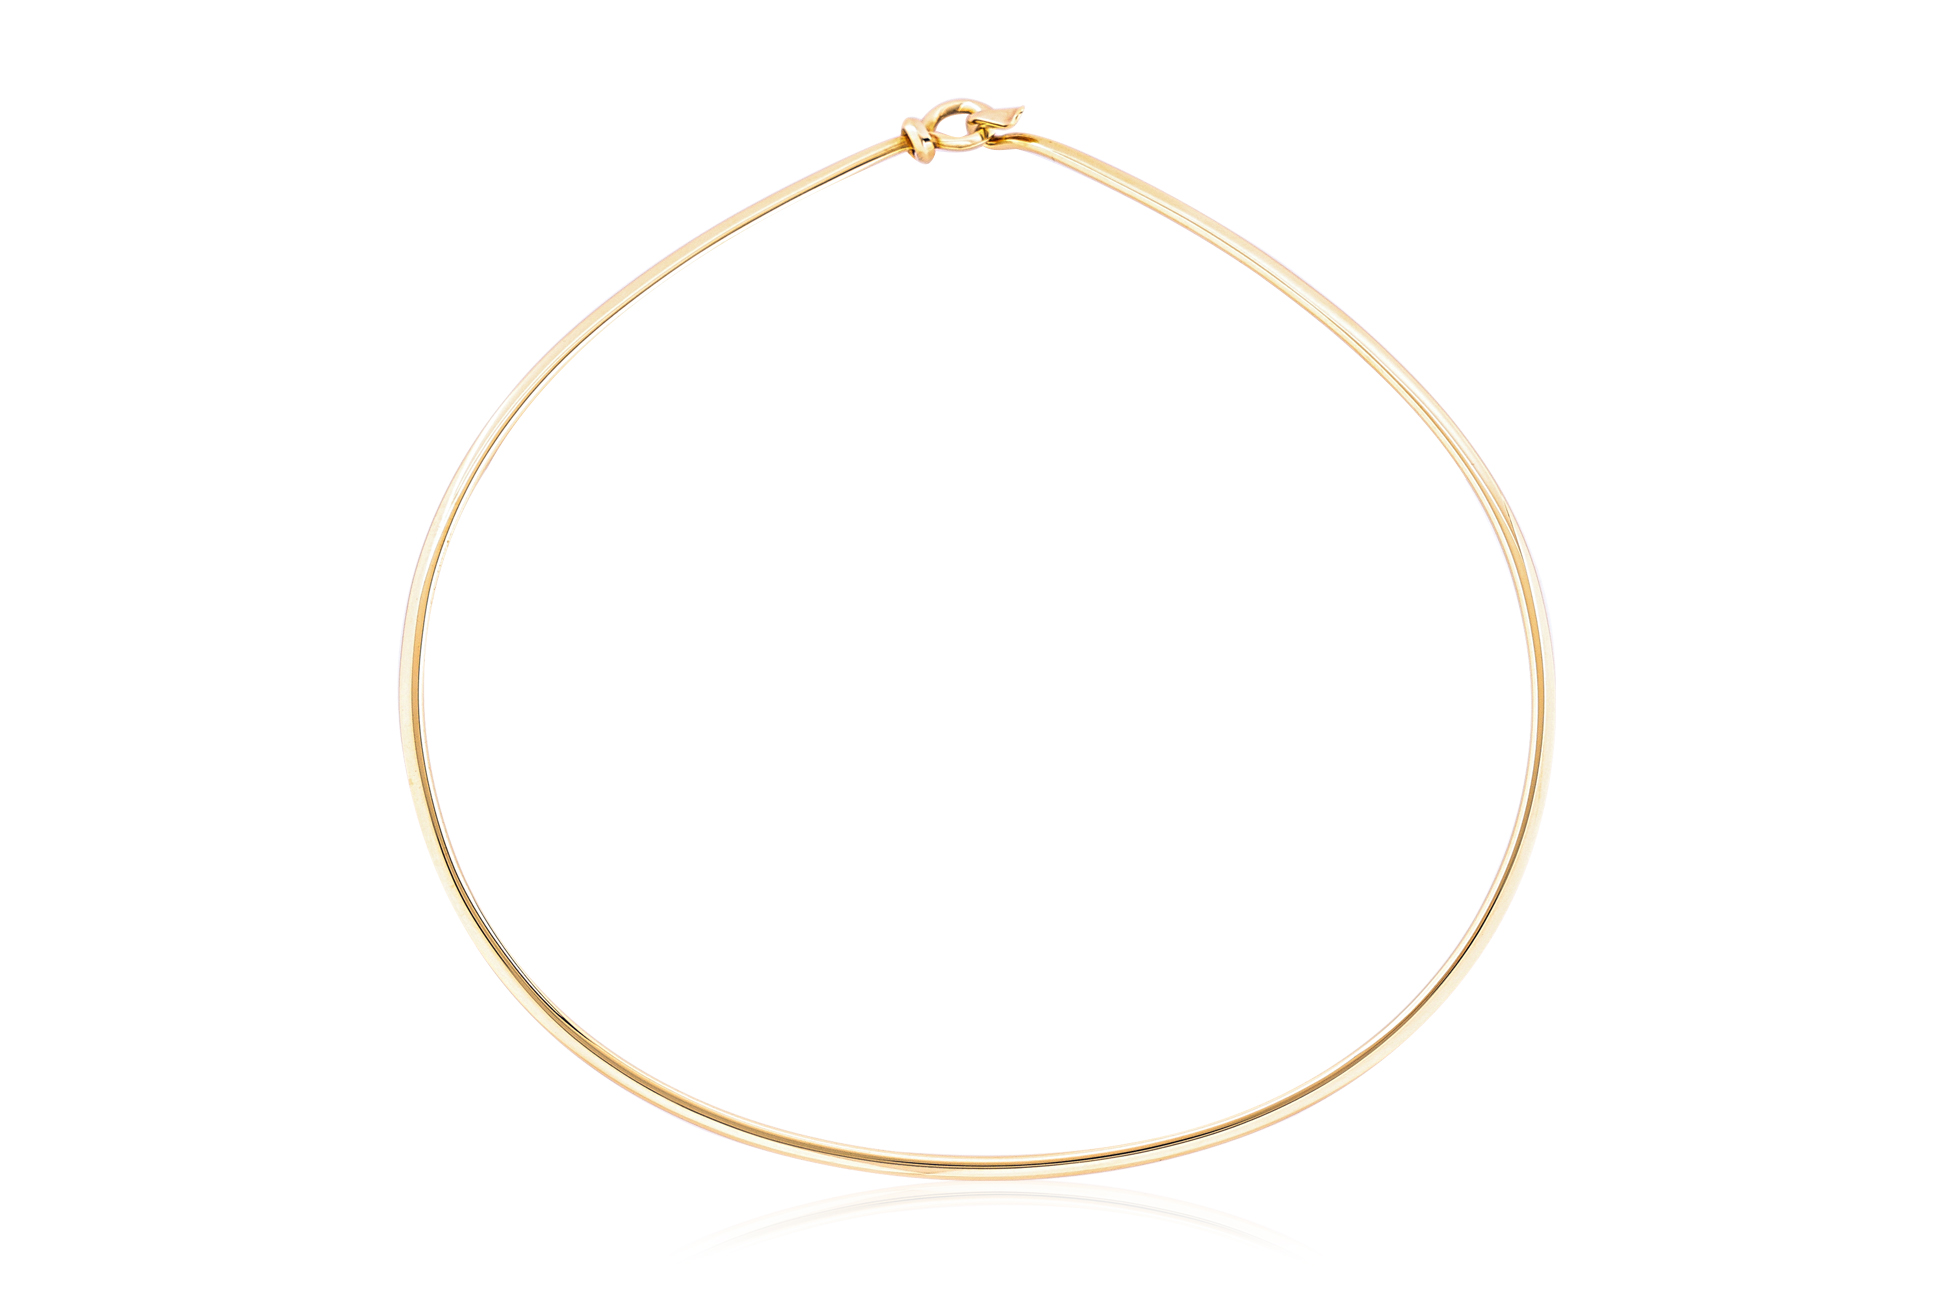 A GOLD TORQUE NECKLACE BY GEORG JENSEN